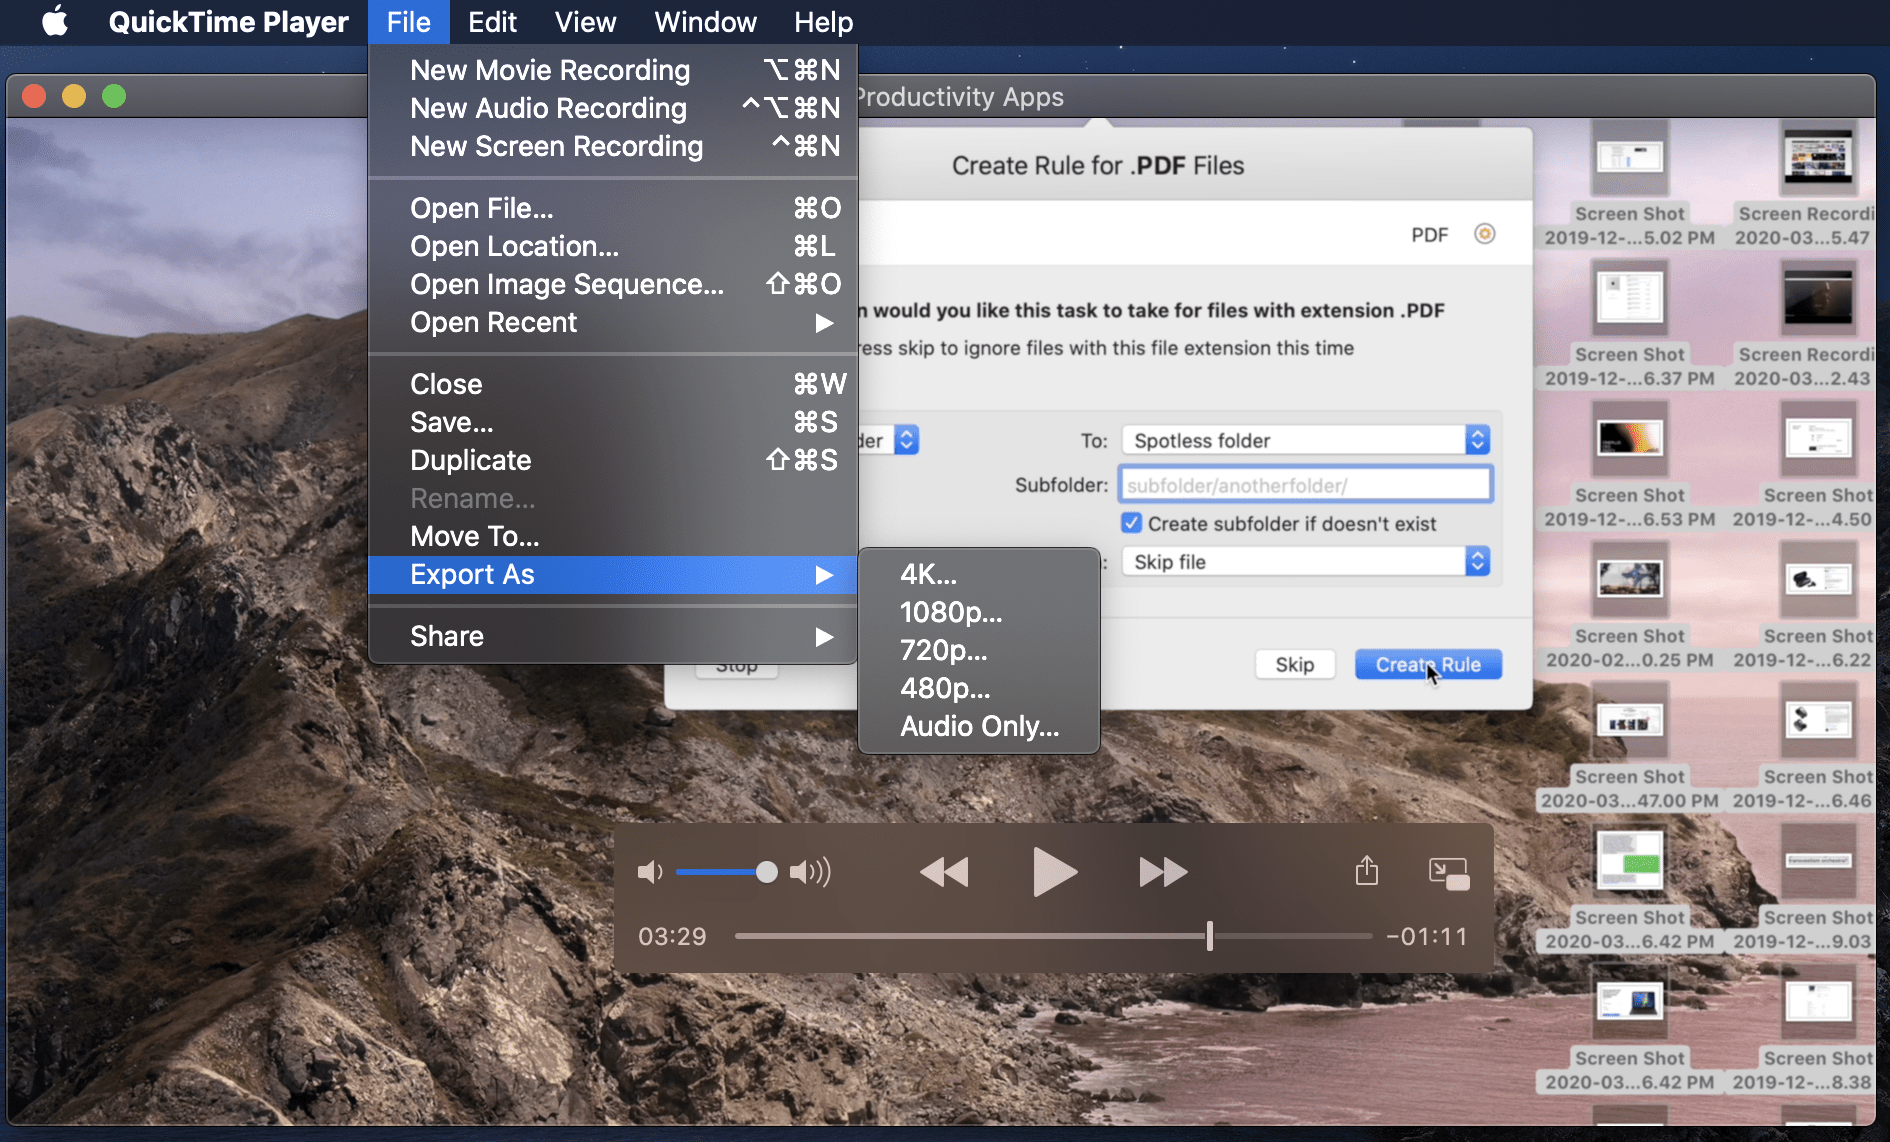 how to convert mov to mp4 on mac quicktime